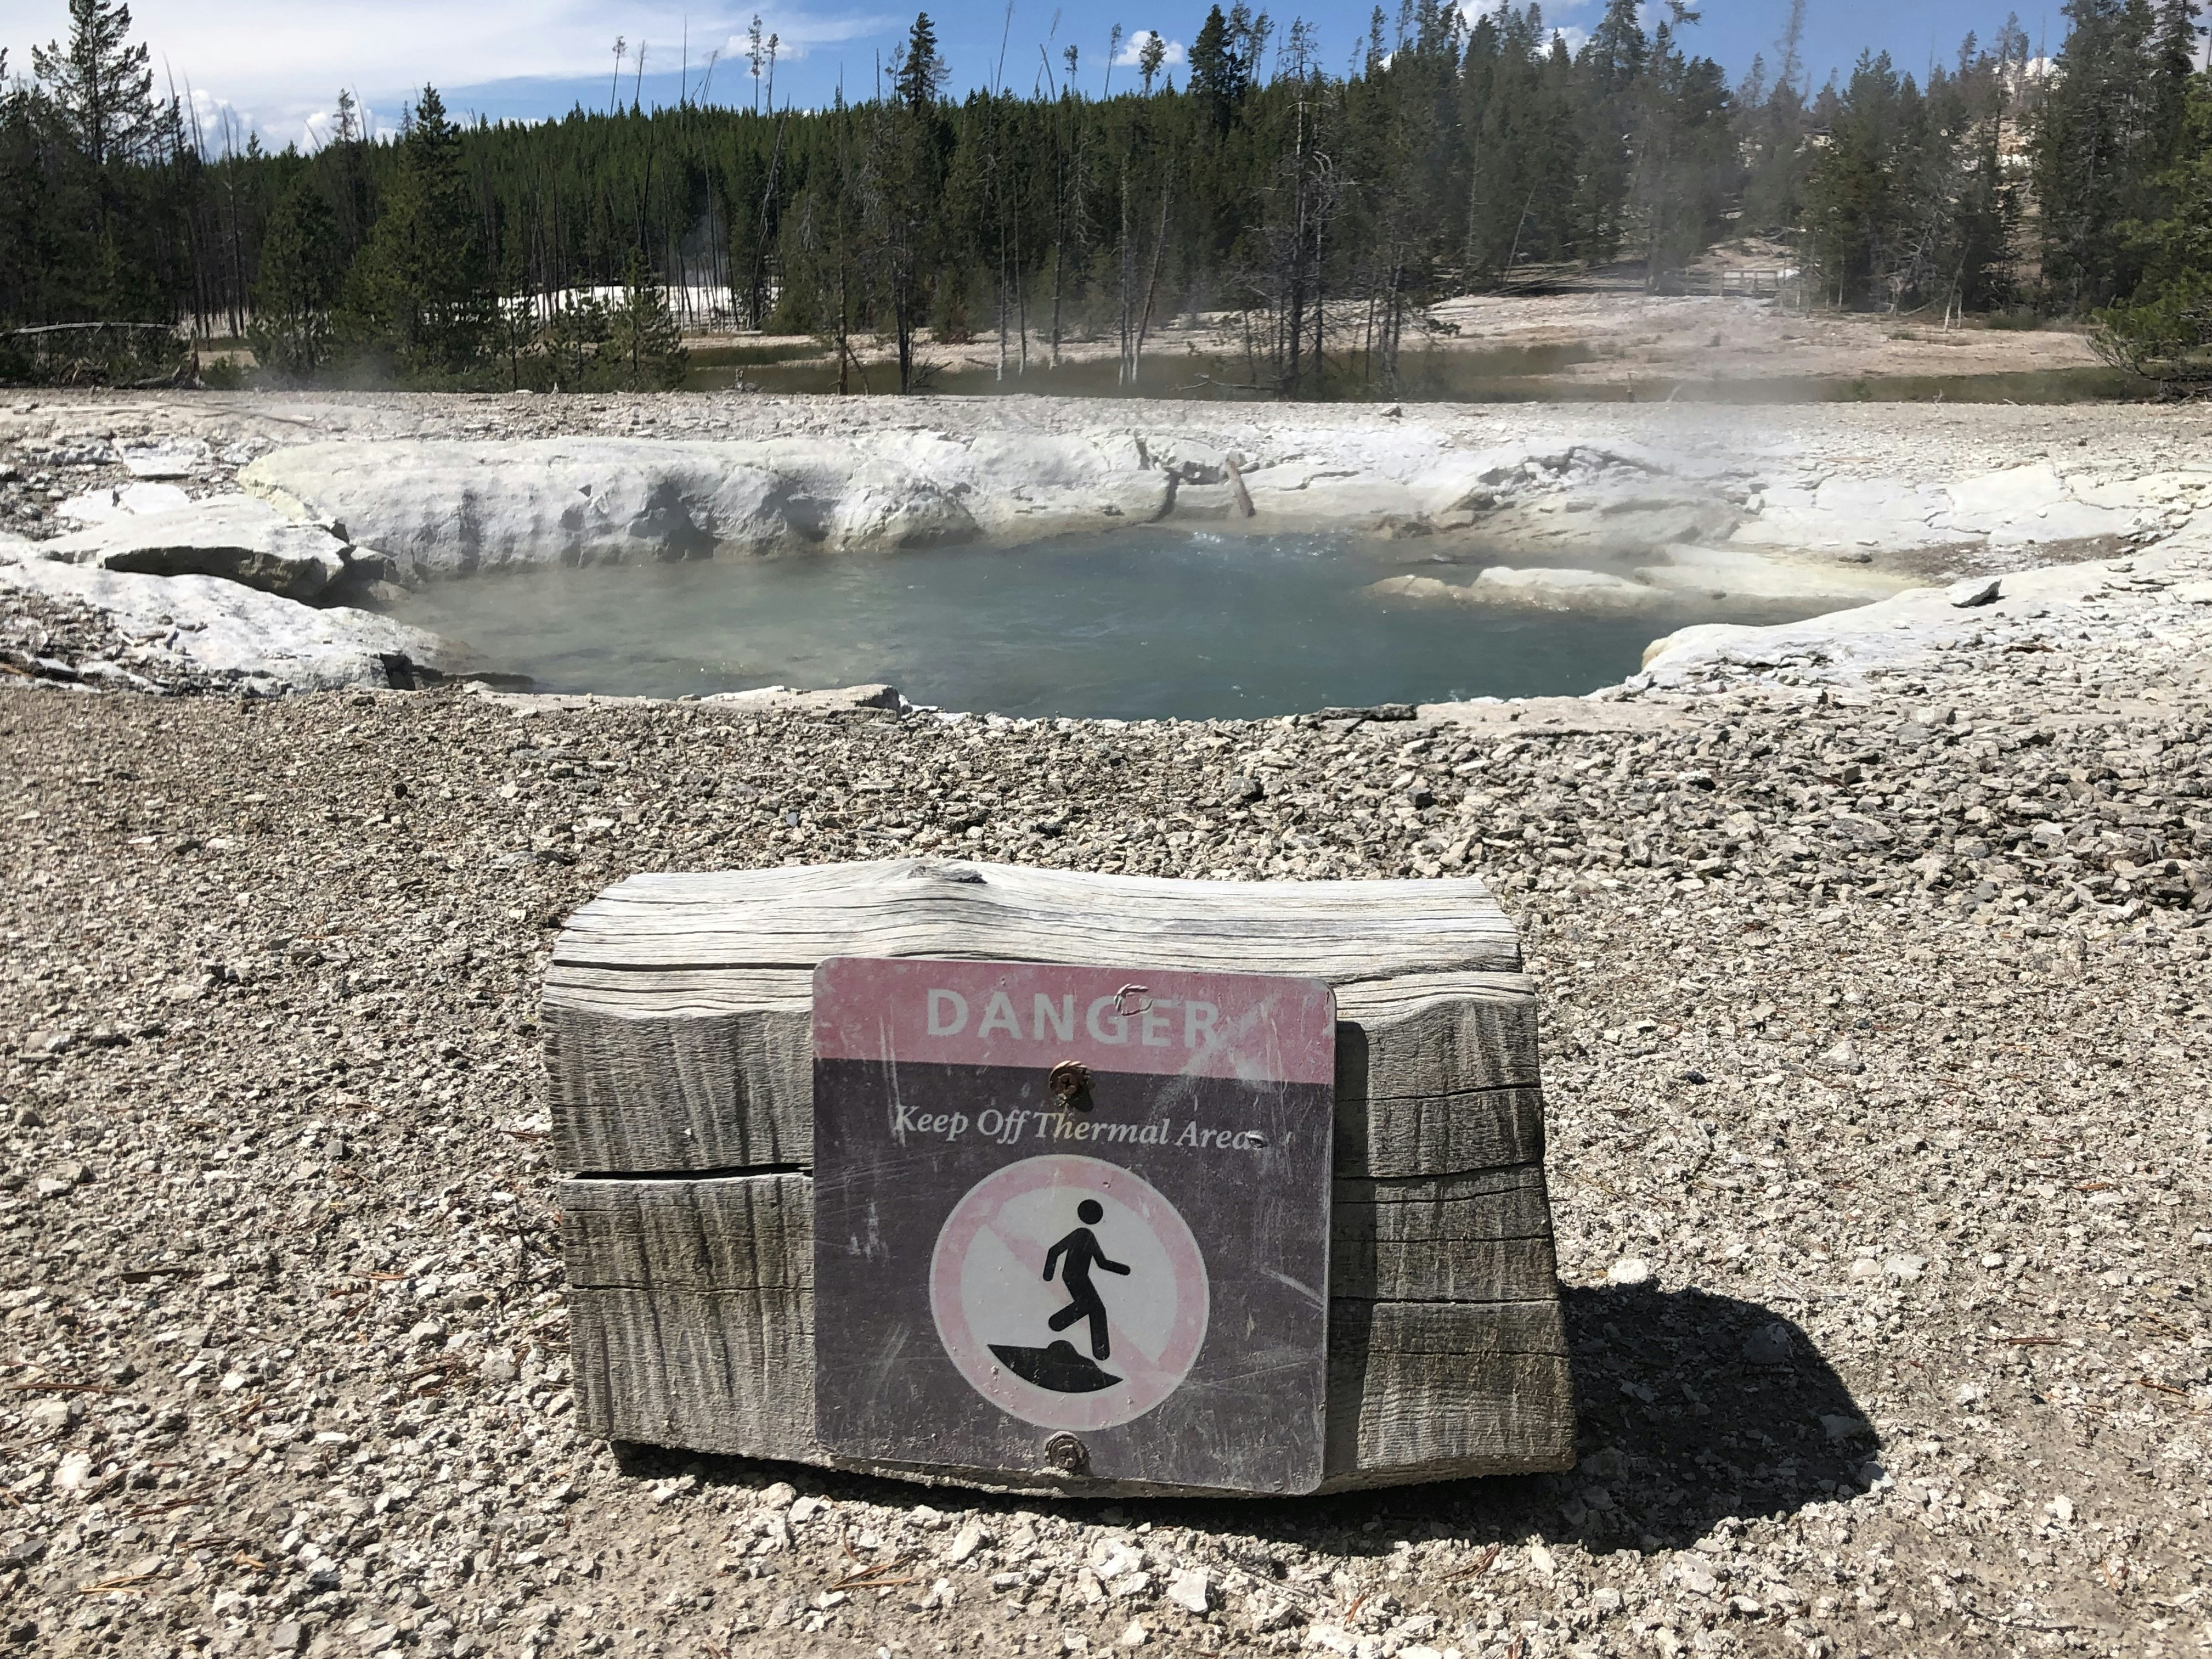 A warning sign advising against venturing into the thermal area is affixed to a large log in Yellowstone National Park